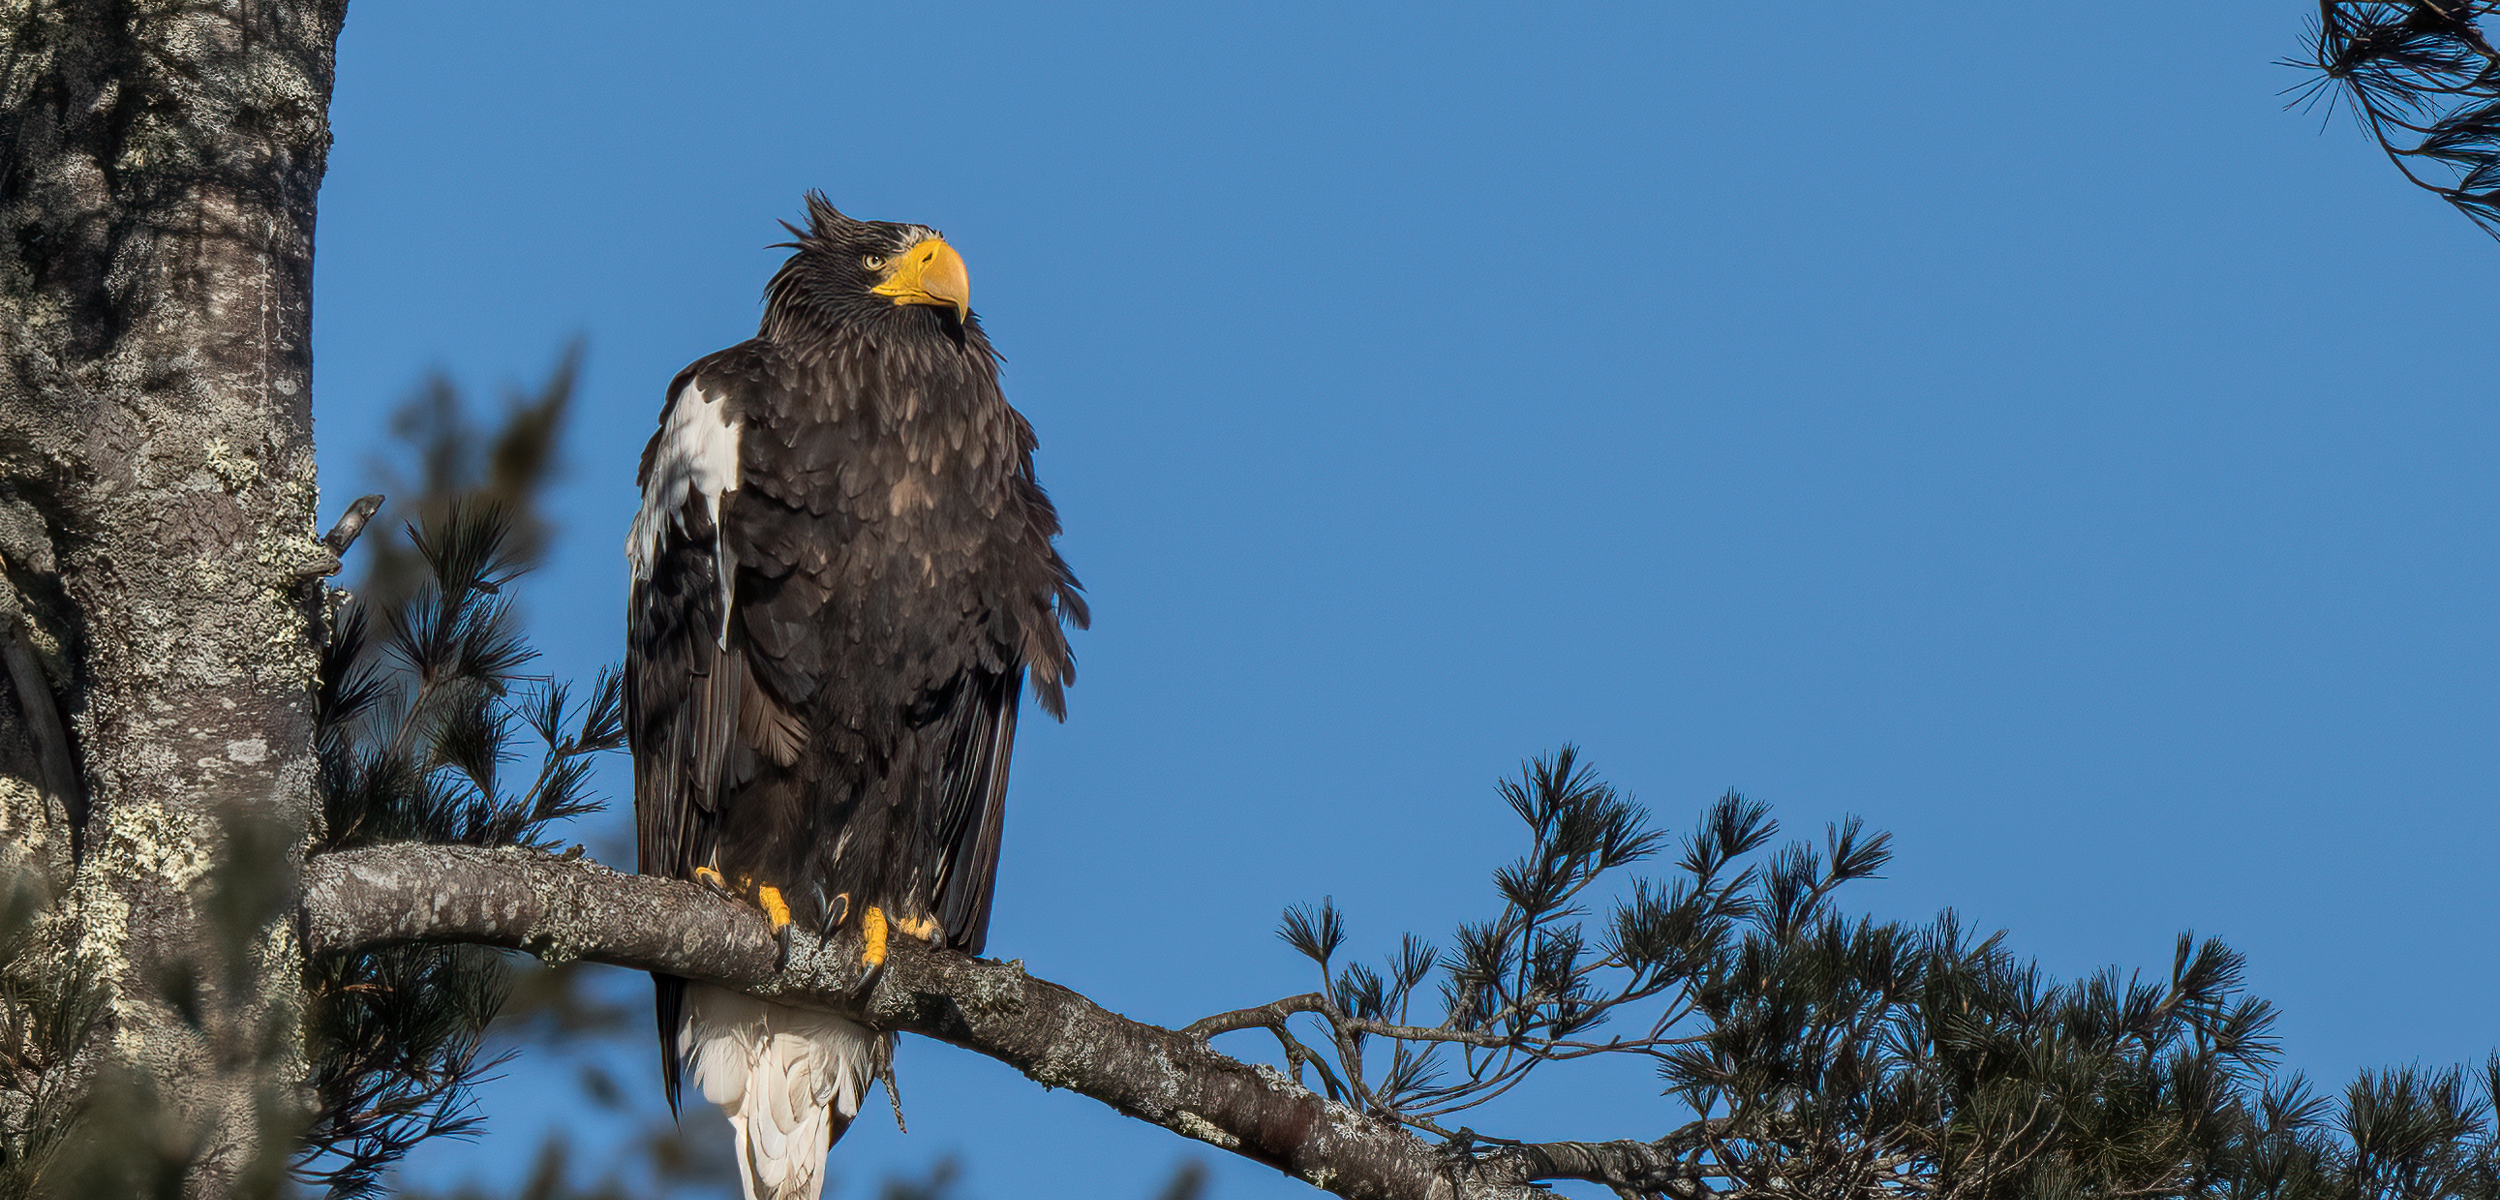 A shot of a big brown eagle with white wings tips sitting on a branch with the blue sky behind